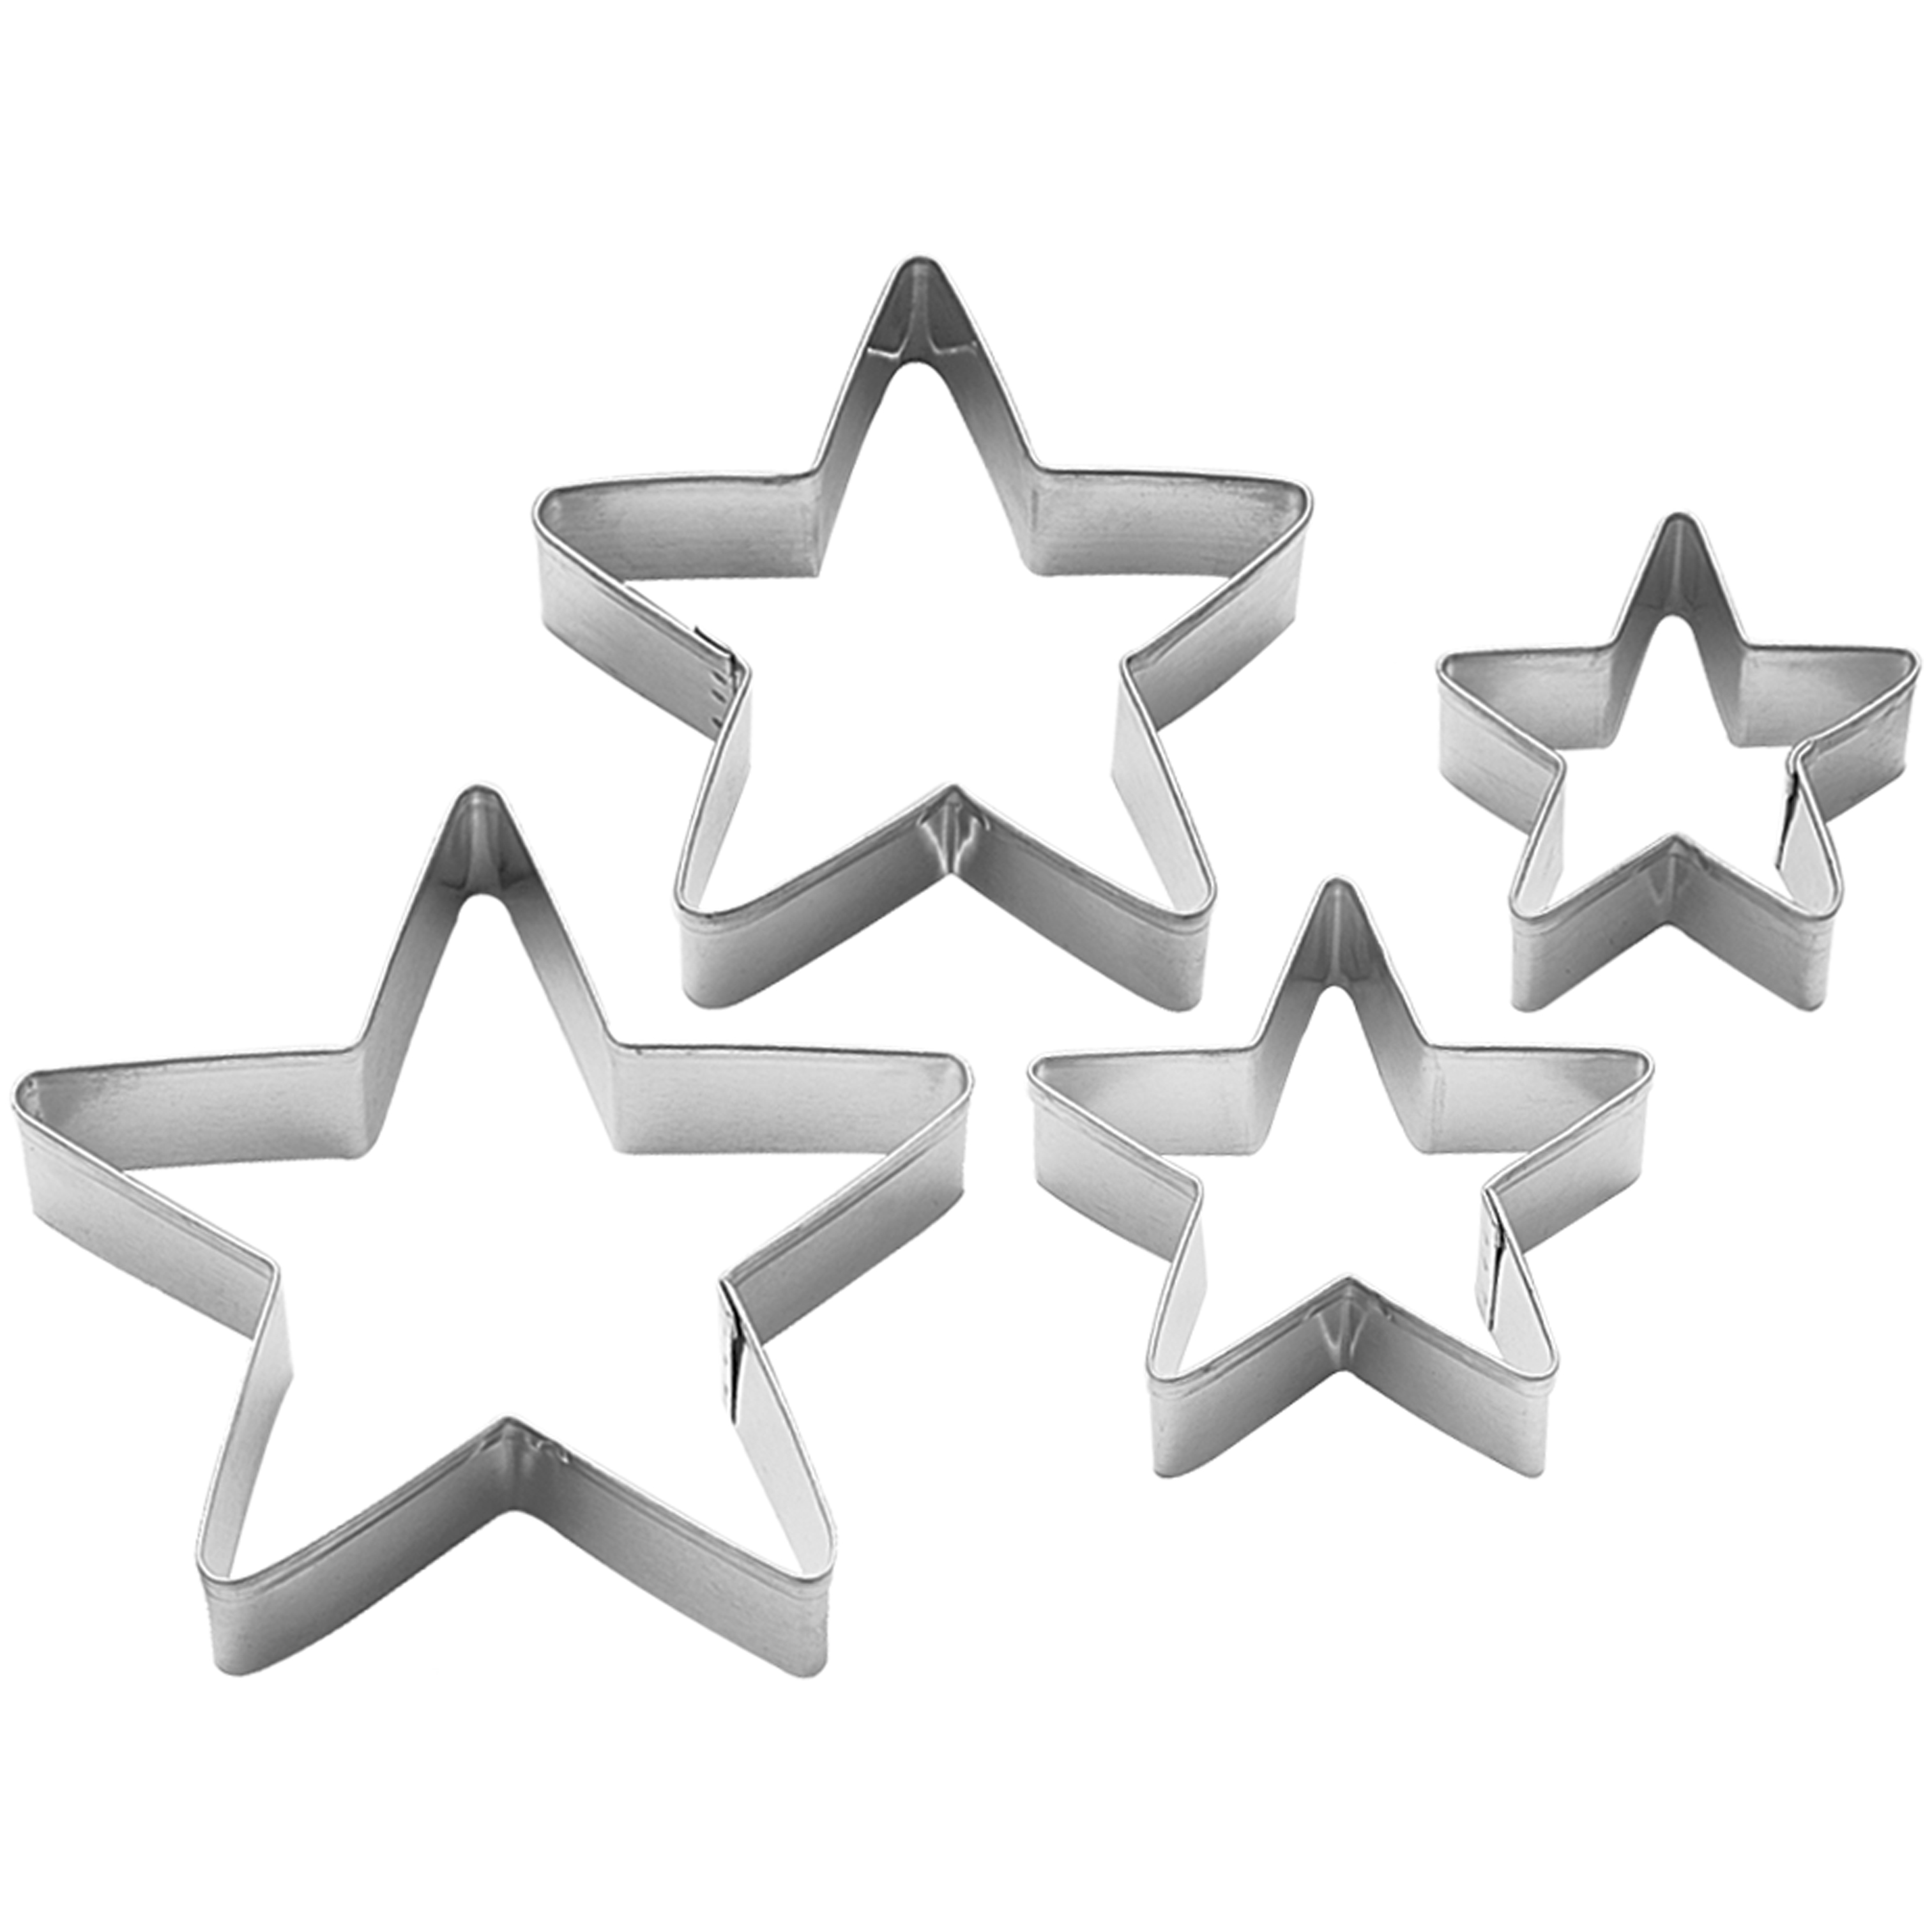 Wilton Nesting Star Biscuit Cutter Set, 4-Piece - image 1 of 2